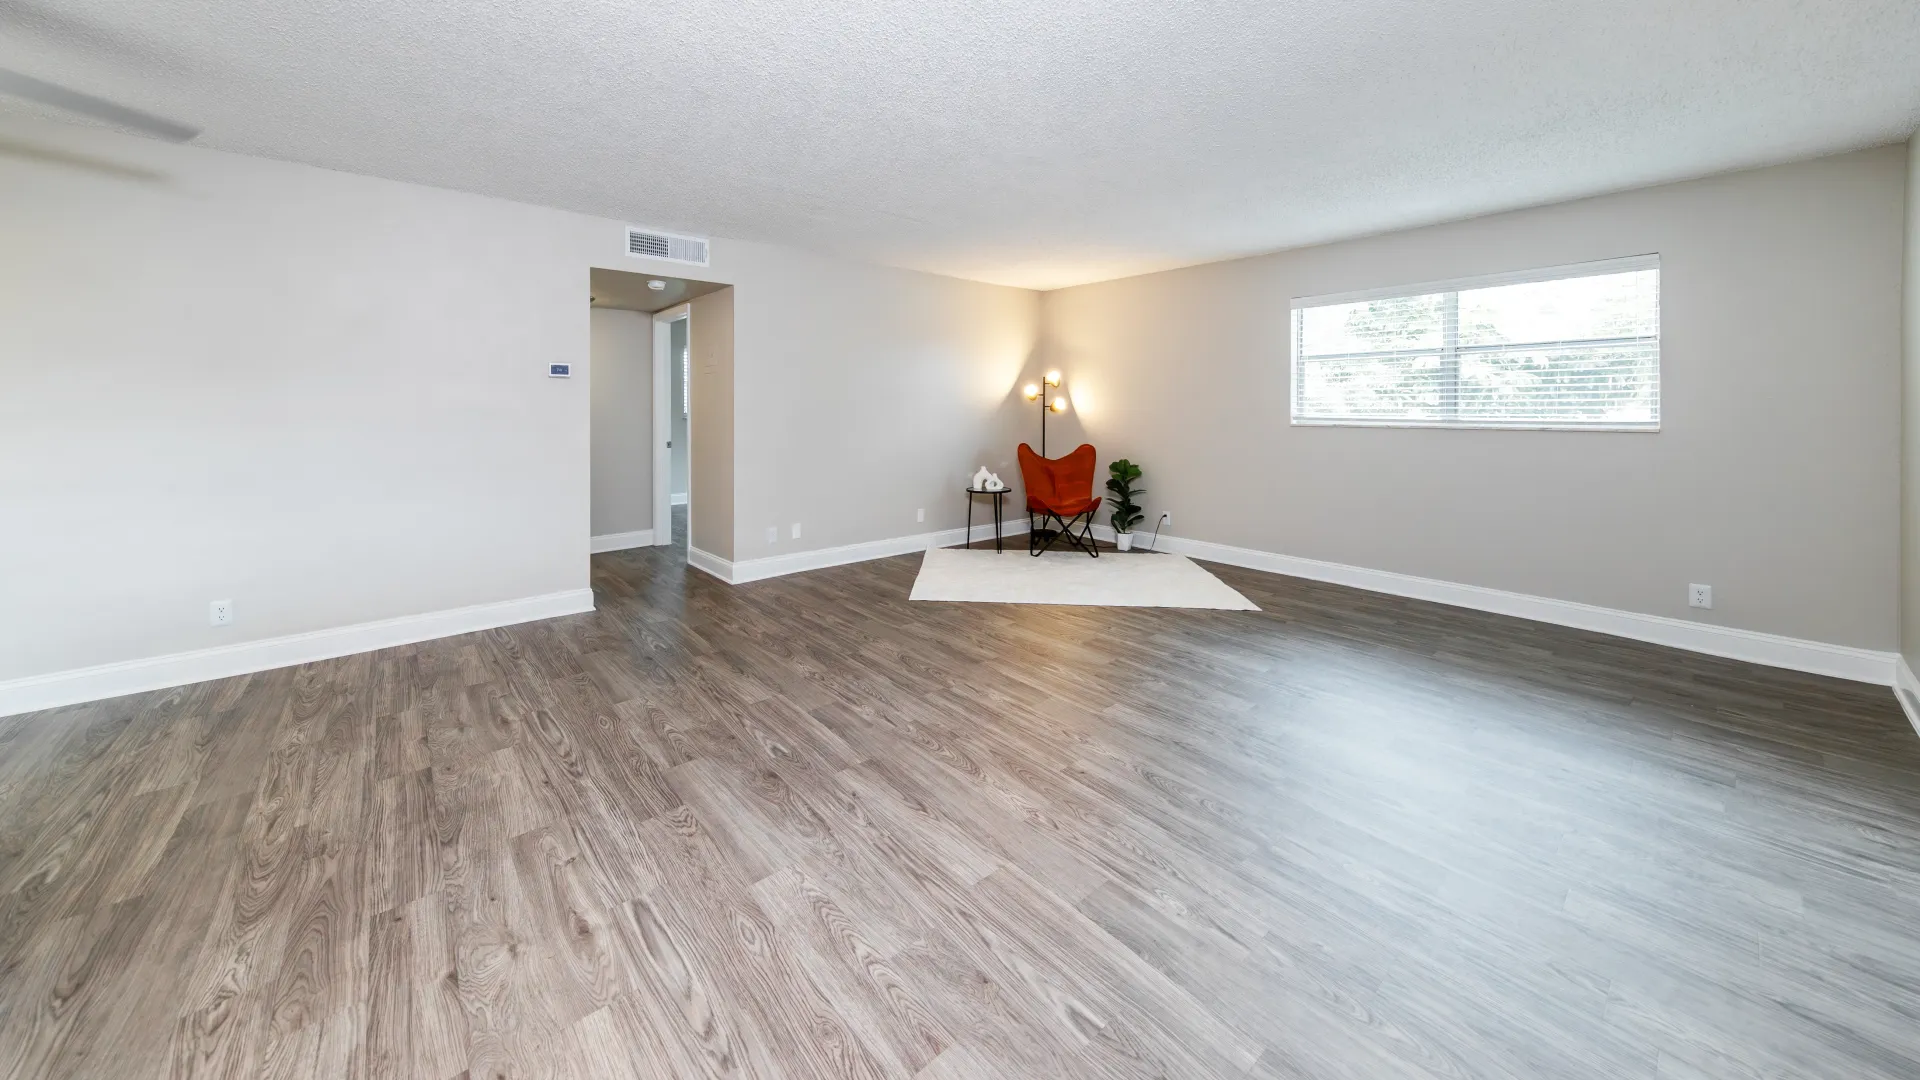 A generously-sized living room with cozy wood-style flooring and a double wide window for sunny, vibrant setting.